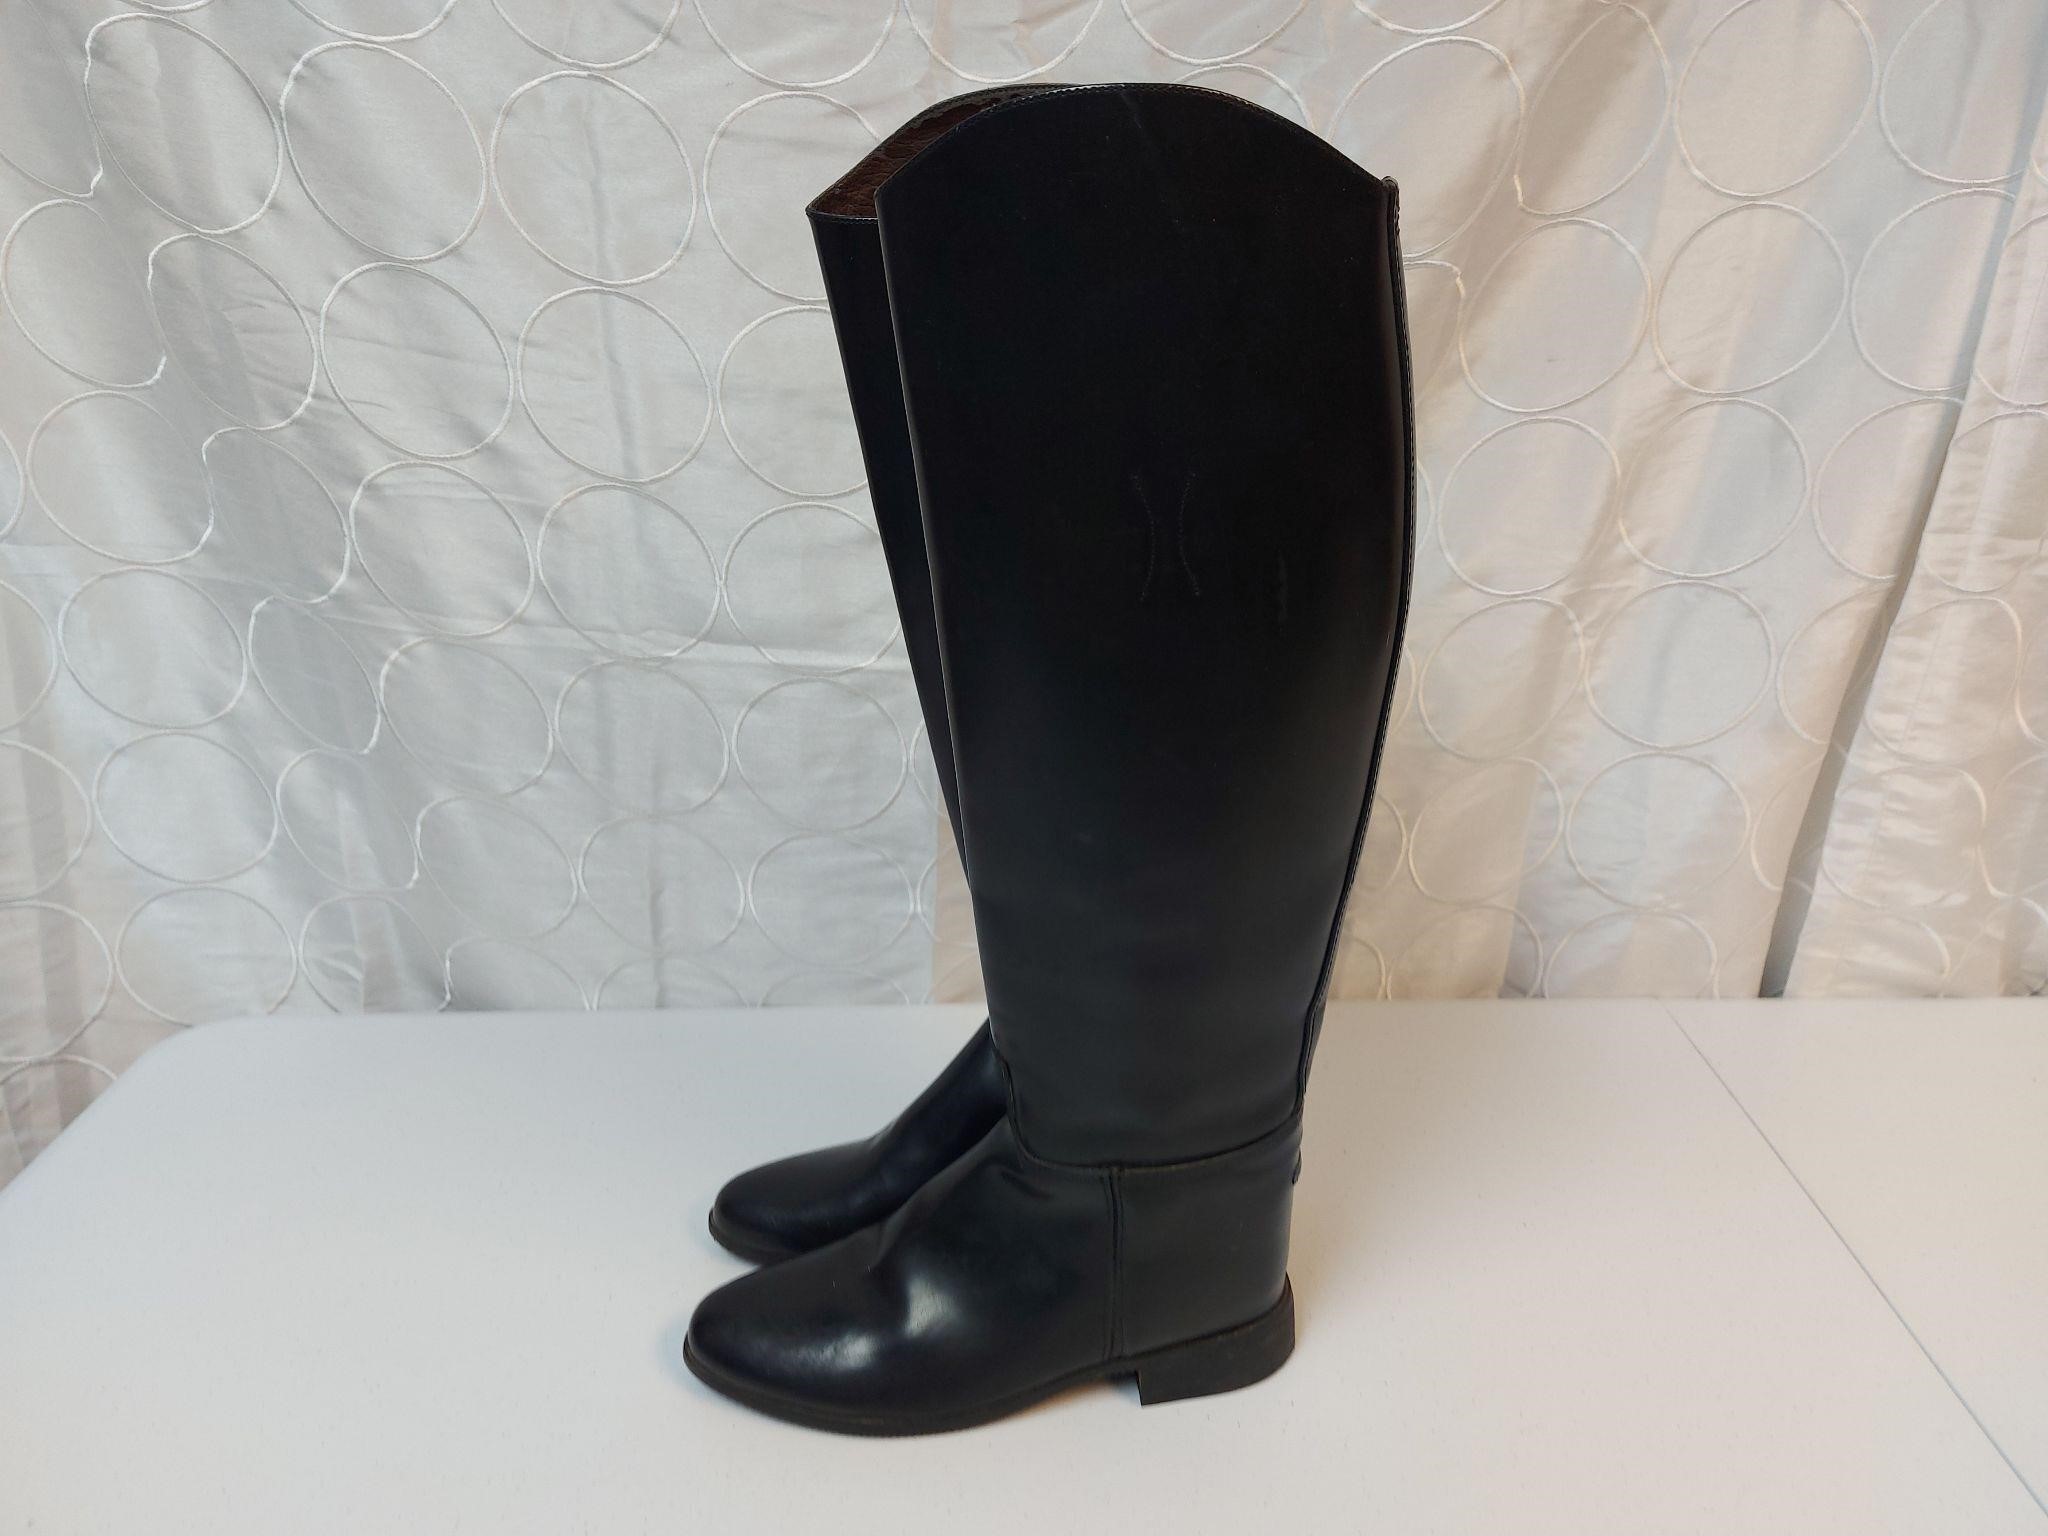 Leather Dress Boots / Riding Boots Ladies 7w